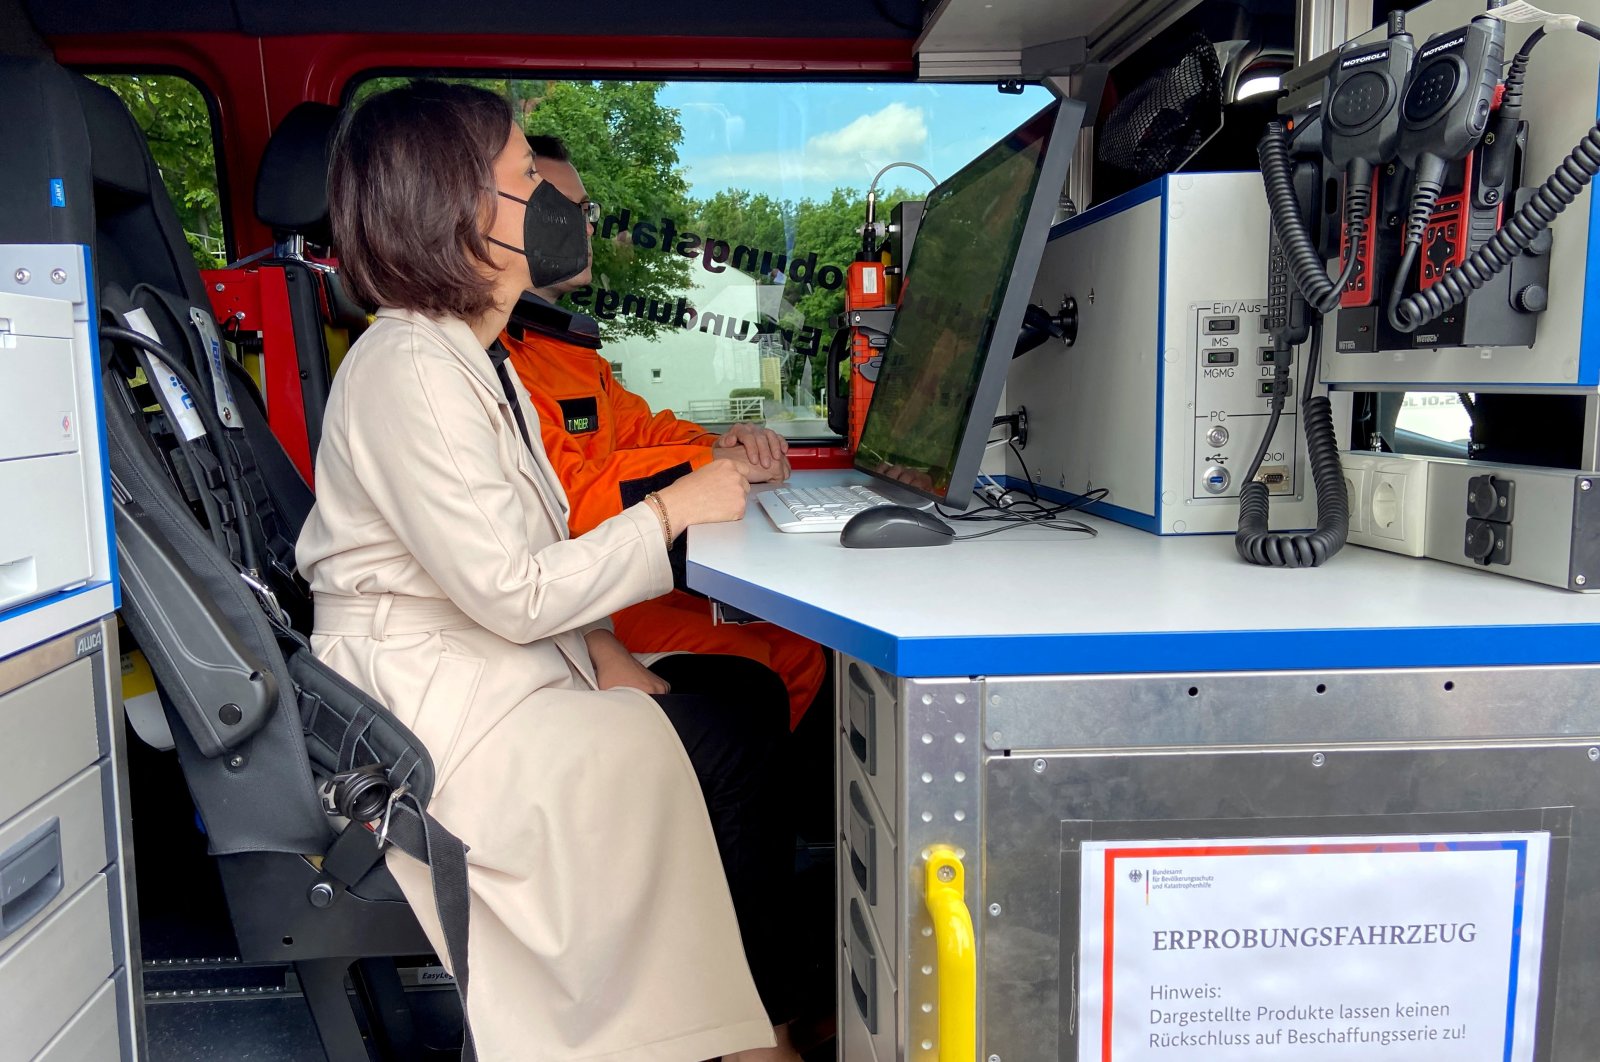 German Foreign Minister Annalena Baerbock sits in a civil society protection vehicle, in Bad Neuenahr, Germany, July 16, 2022. (Reuters Photo)